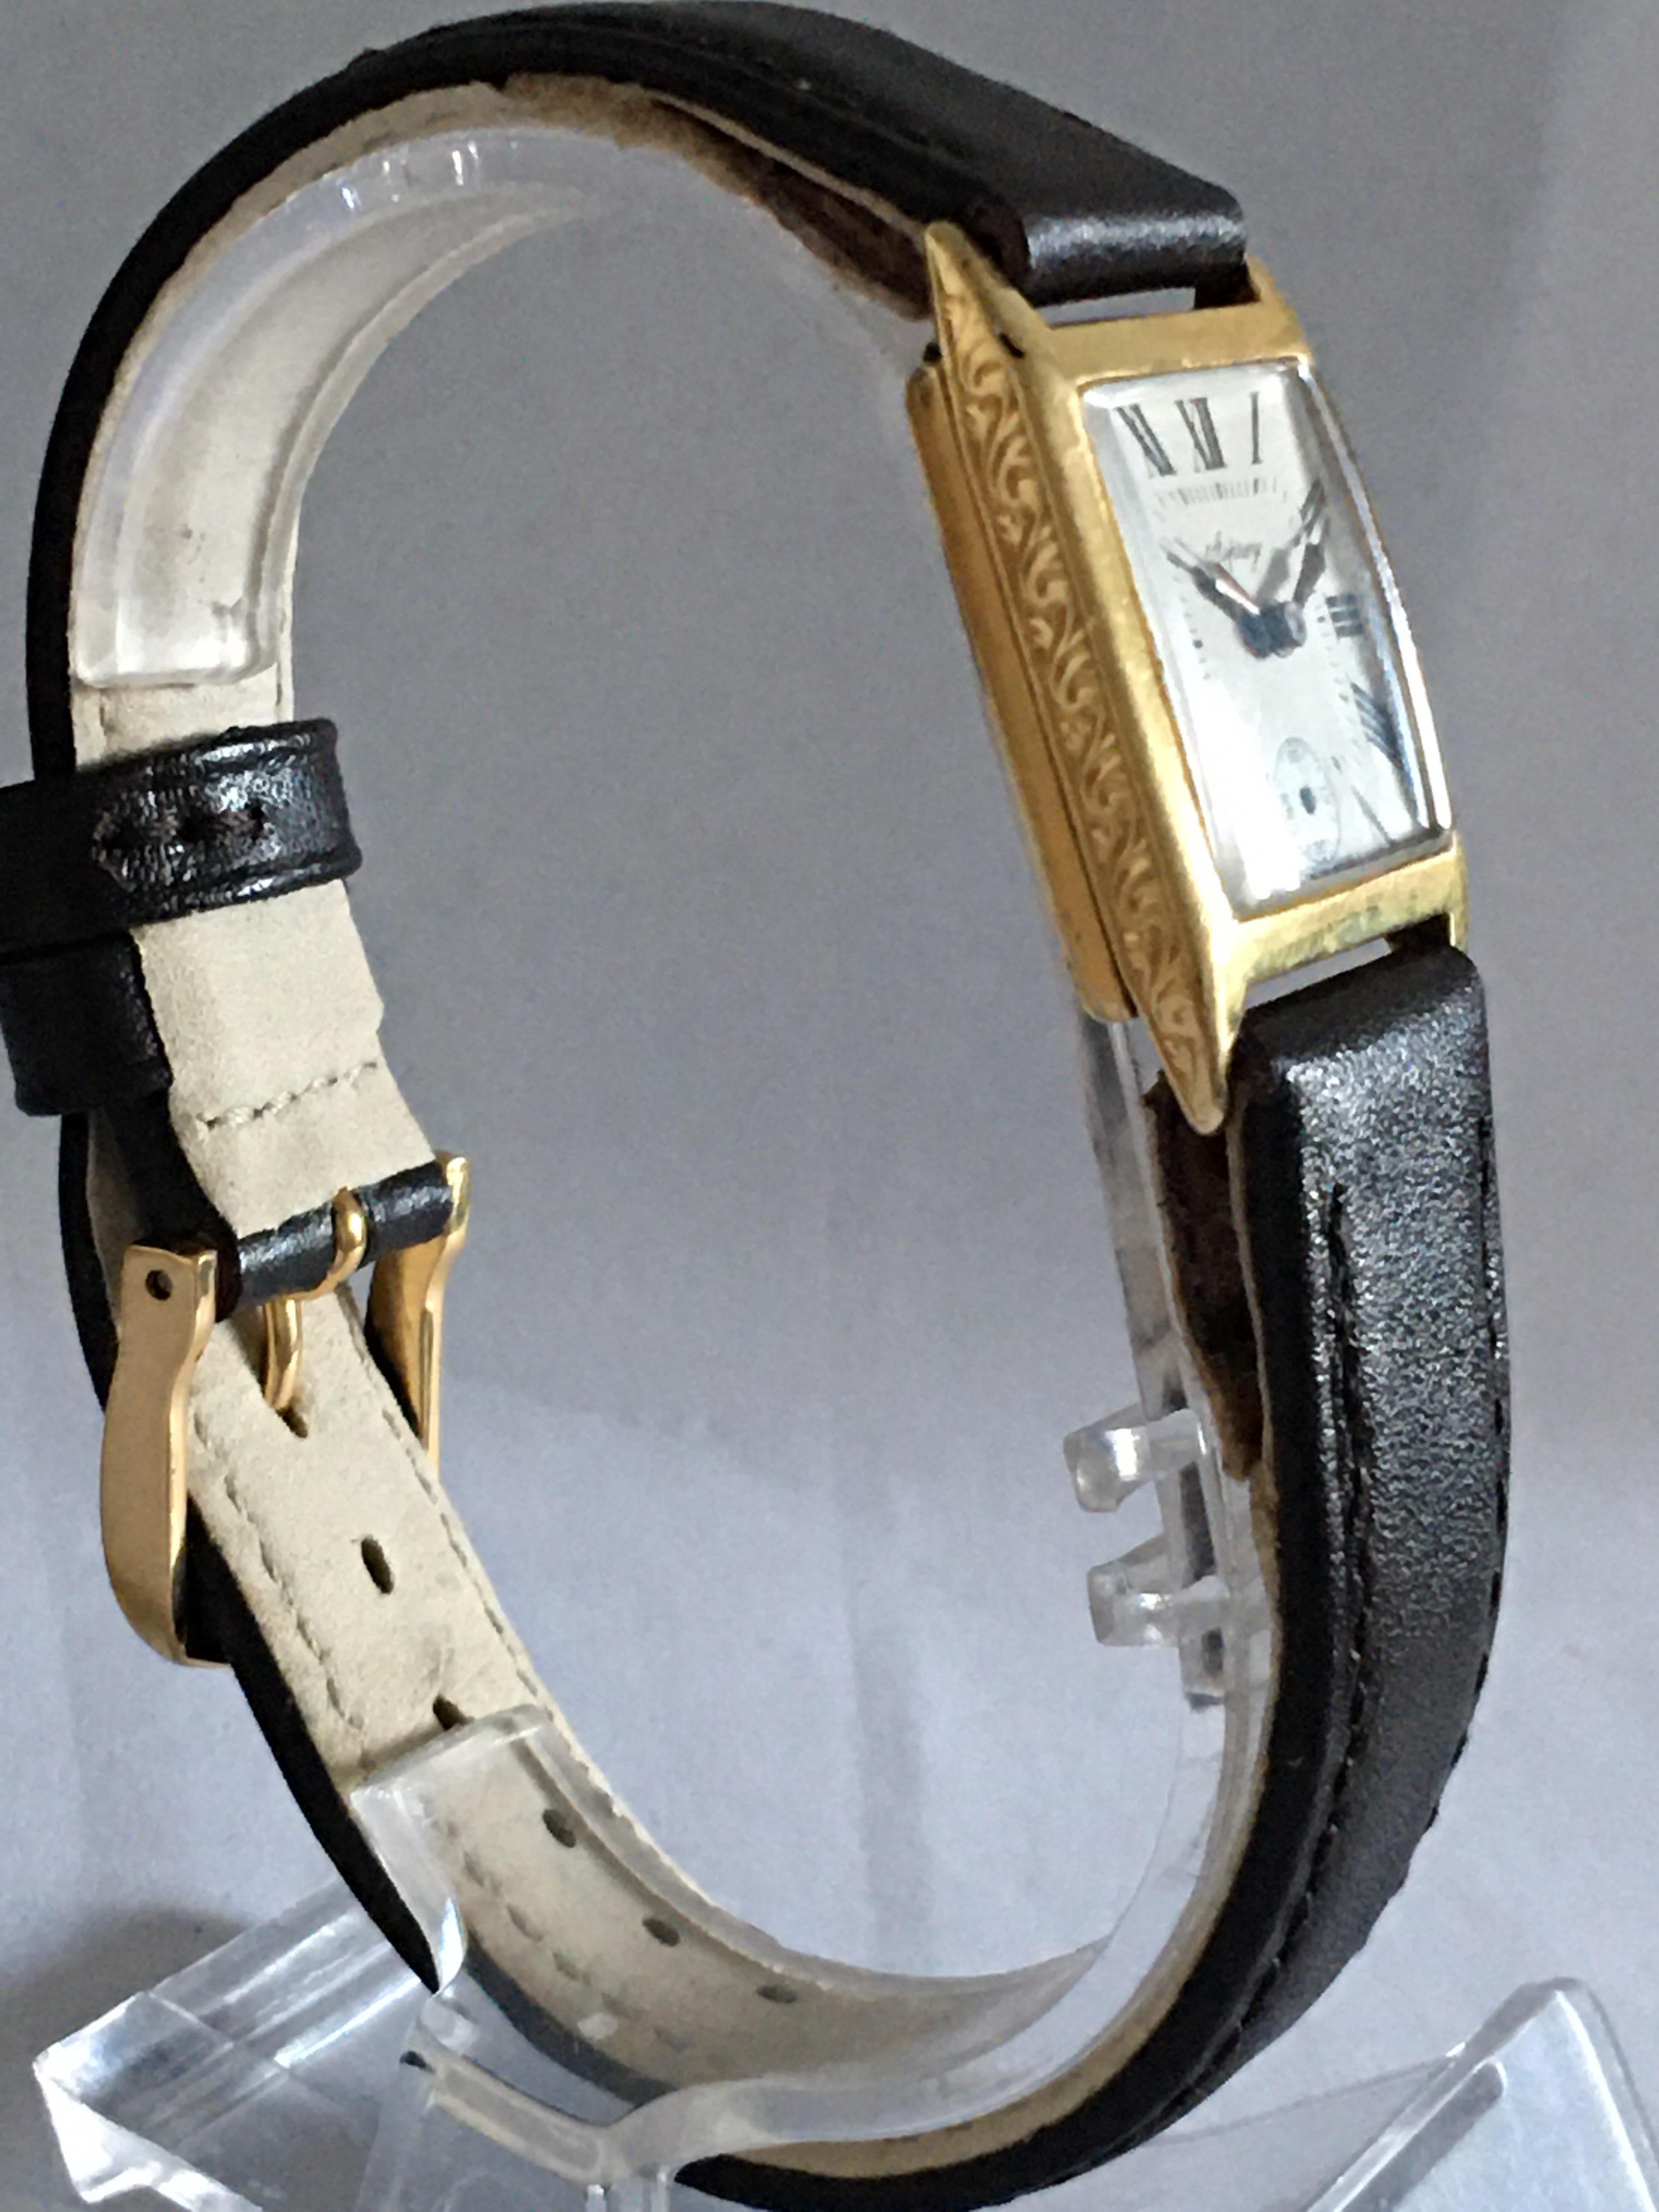 This beautiful 18K Gold mechanical vintage watch is working and ticking well. The Secondary hand is missing. Tiny dent & scratches on the back of watch case as shown. Please study the images carefully as form part of the description.